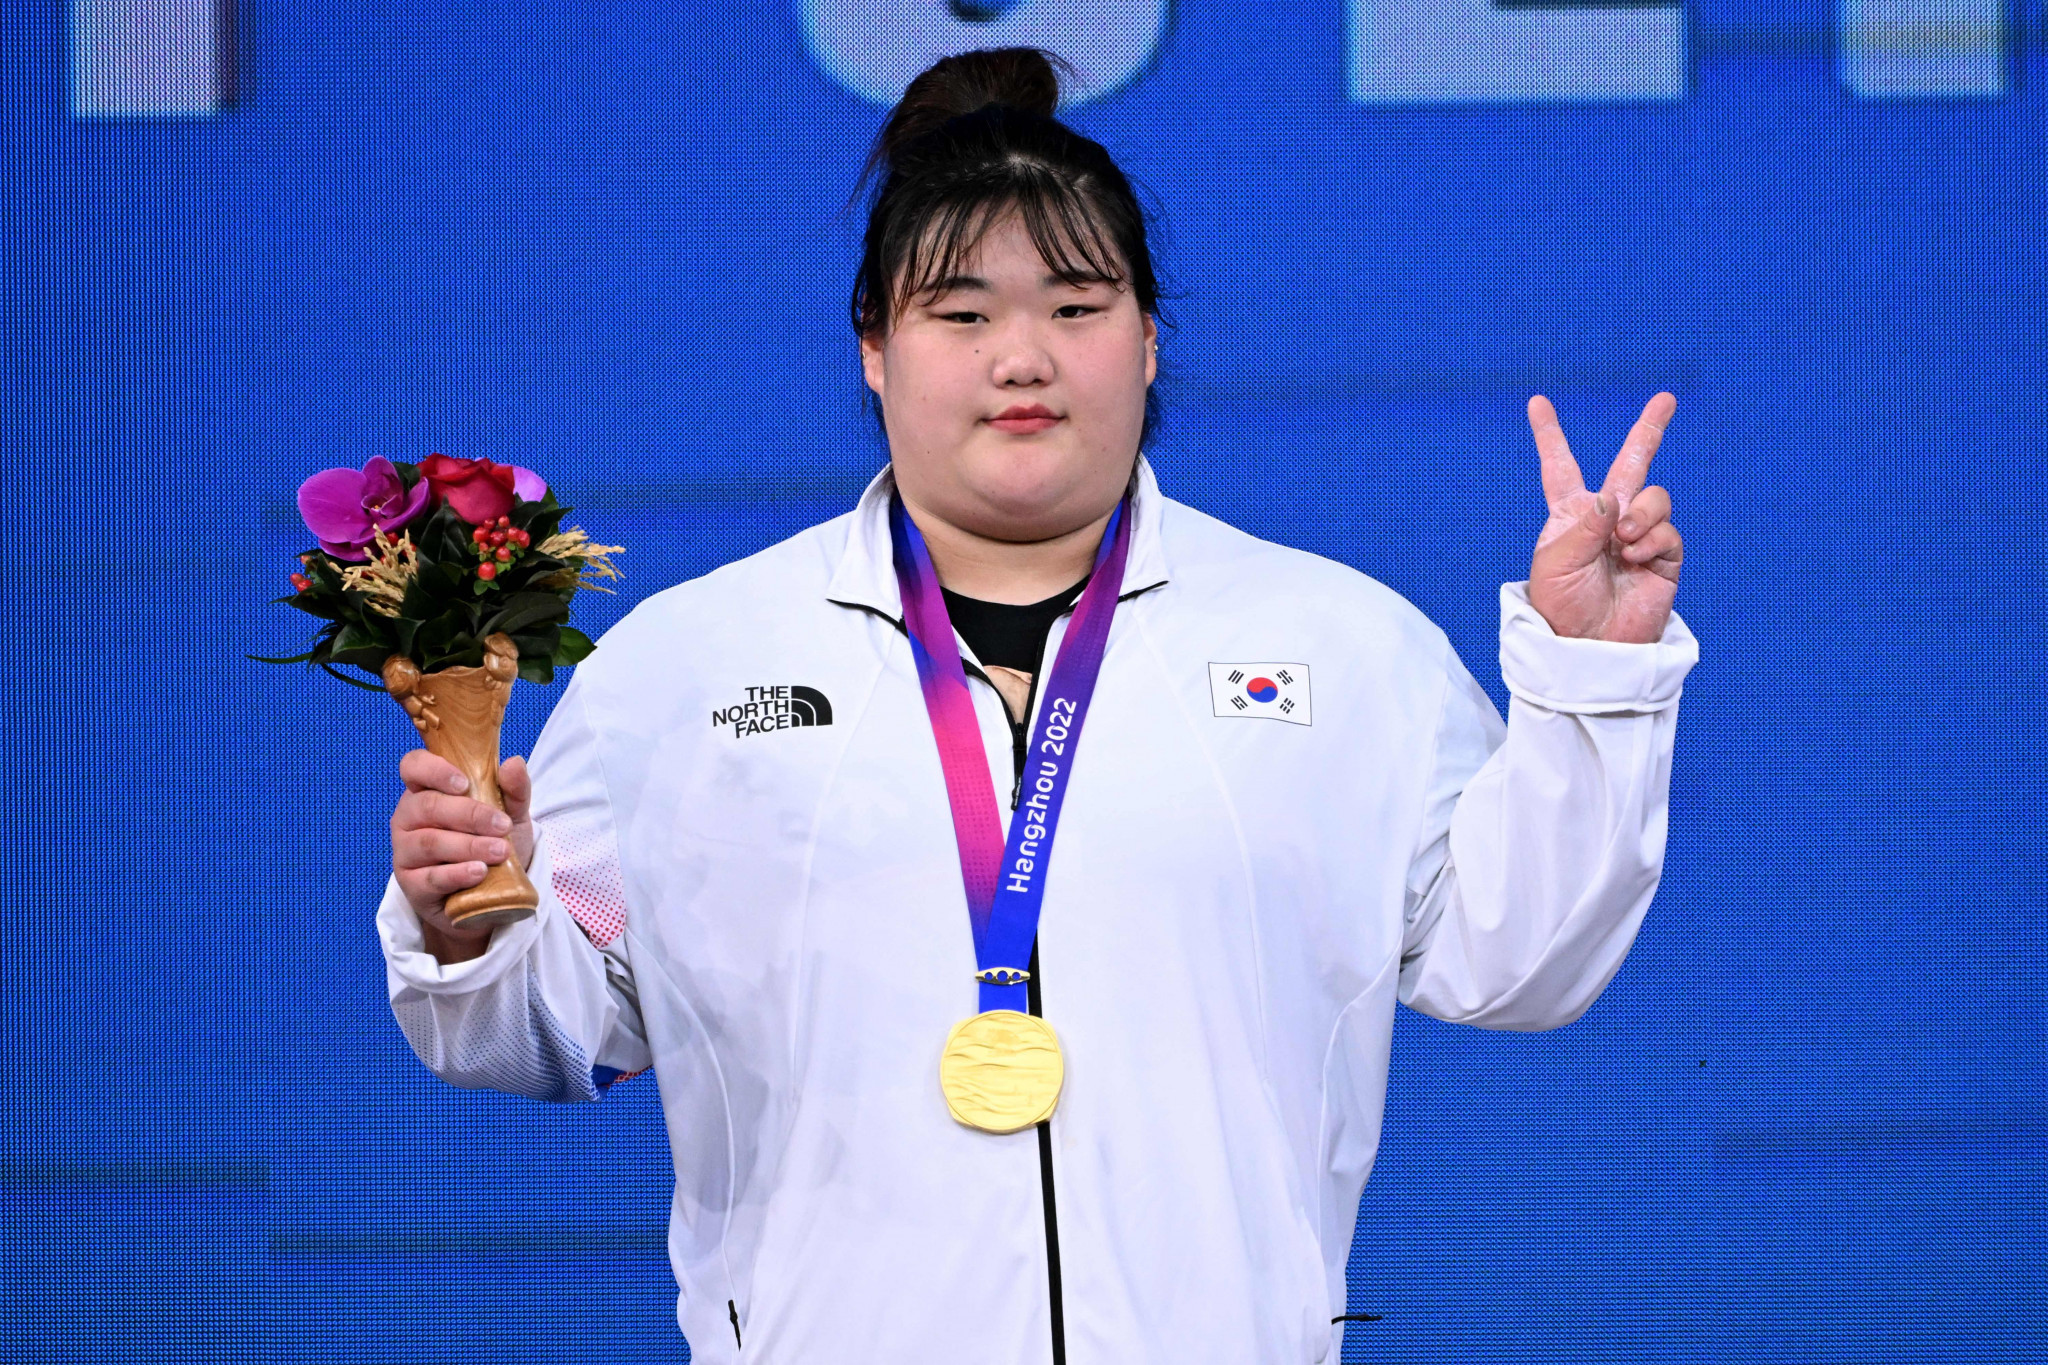 Park Hyejeong won the women's +87kg weightlifting title at the Asian Games to add to her world crown ©Getty Images